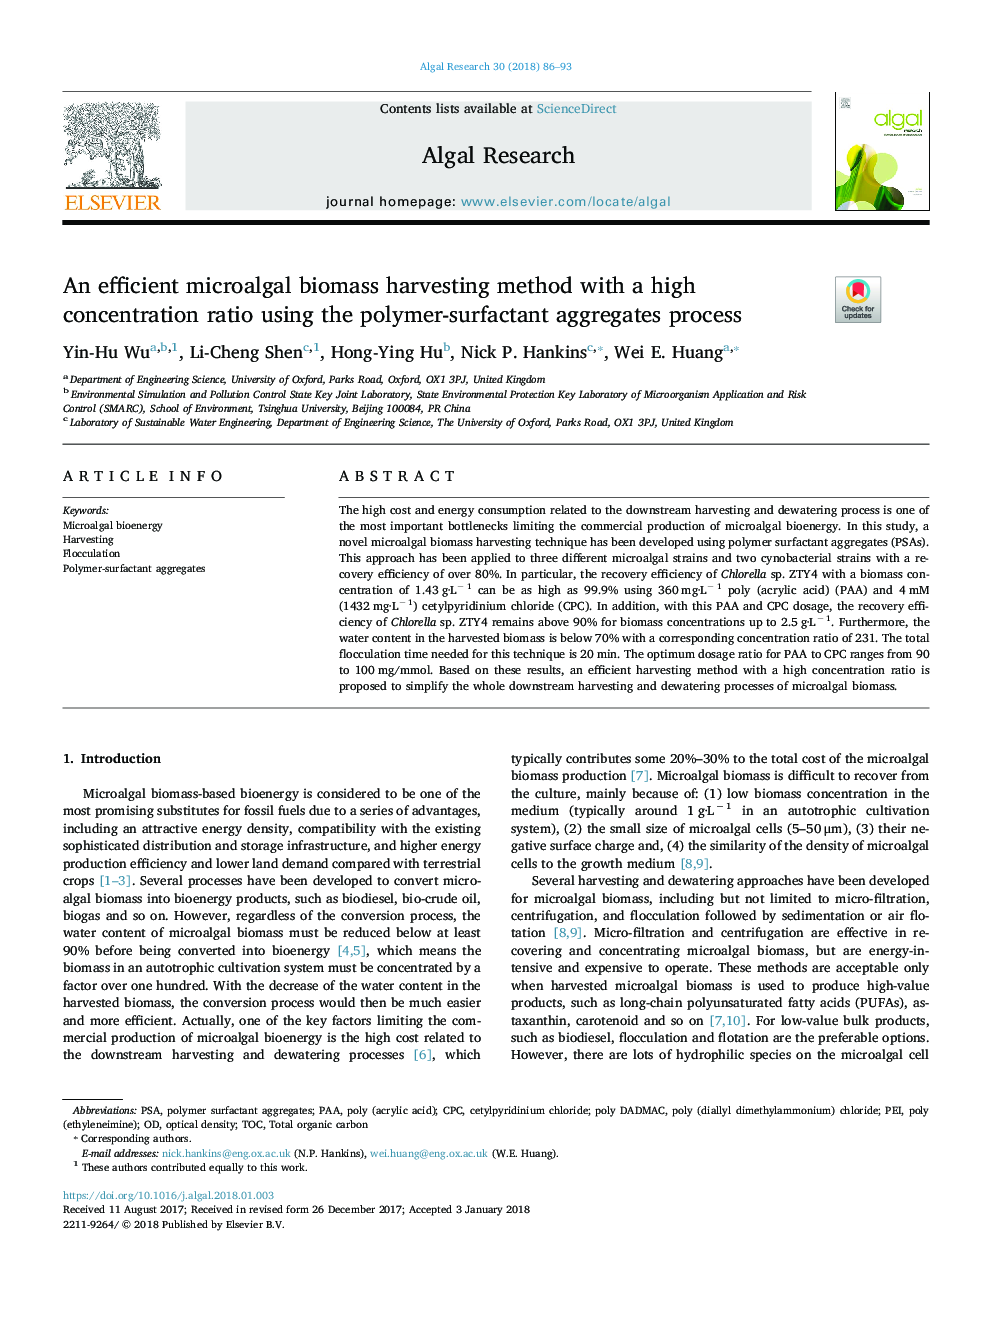 An efficient microalgal biomass harvesting method with a high concentration ratio using the polymer-surfactant aggregates process